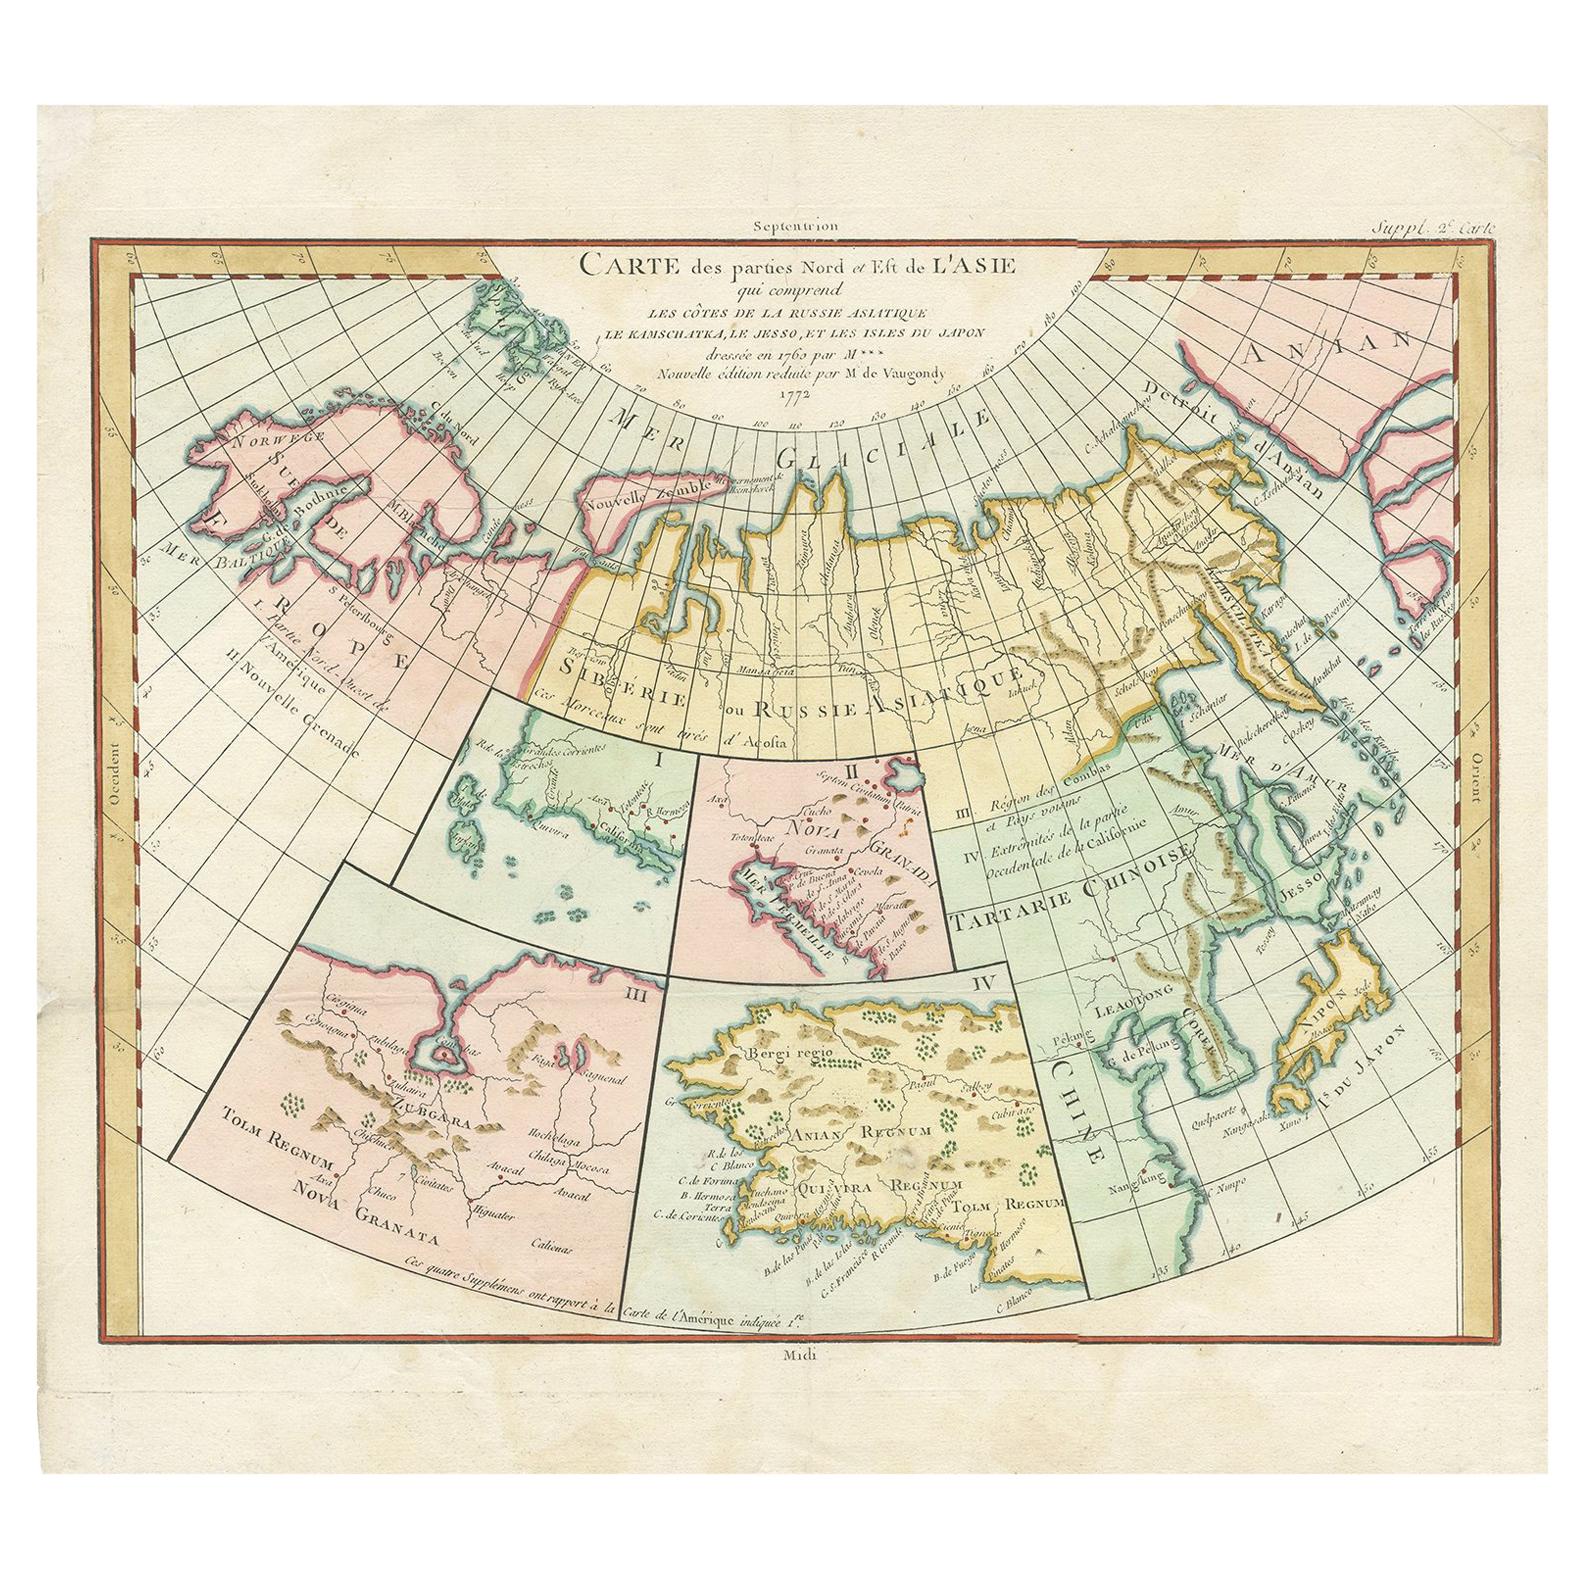 Antique Map of North Europe and East Asia by Vaugondy, circa 1750